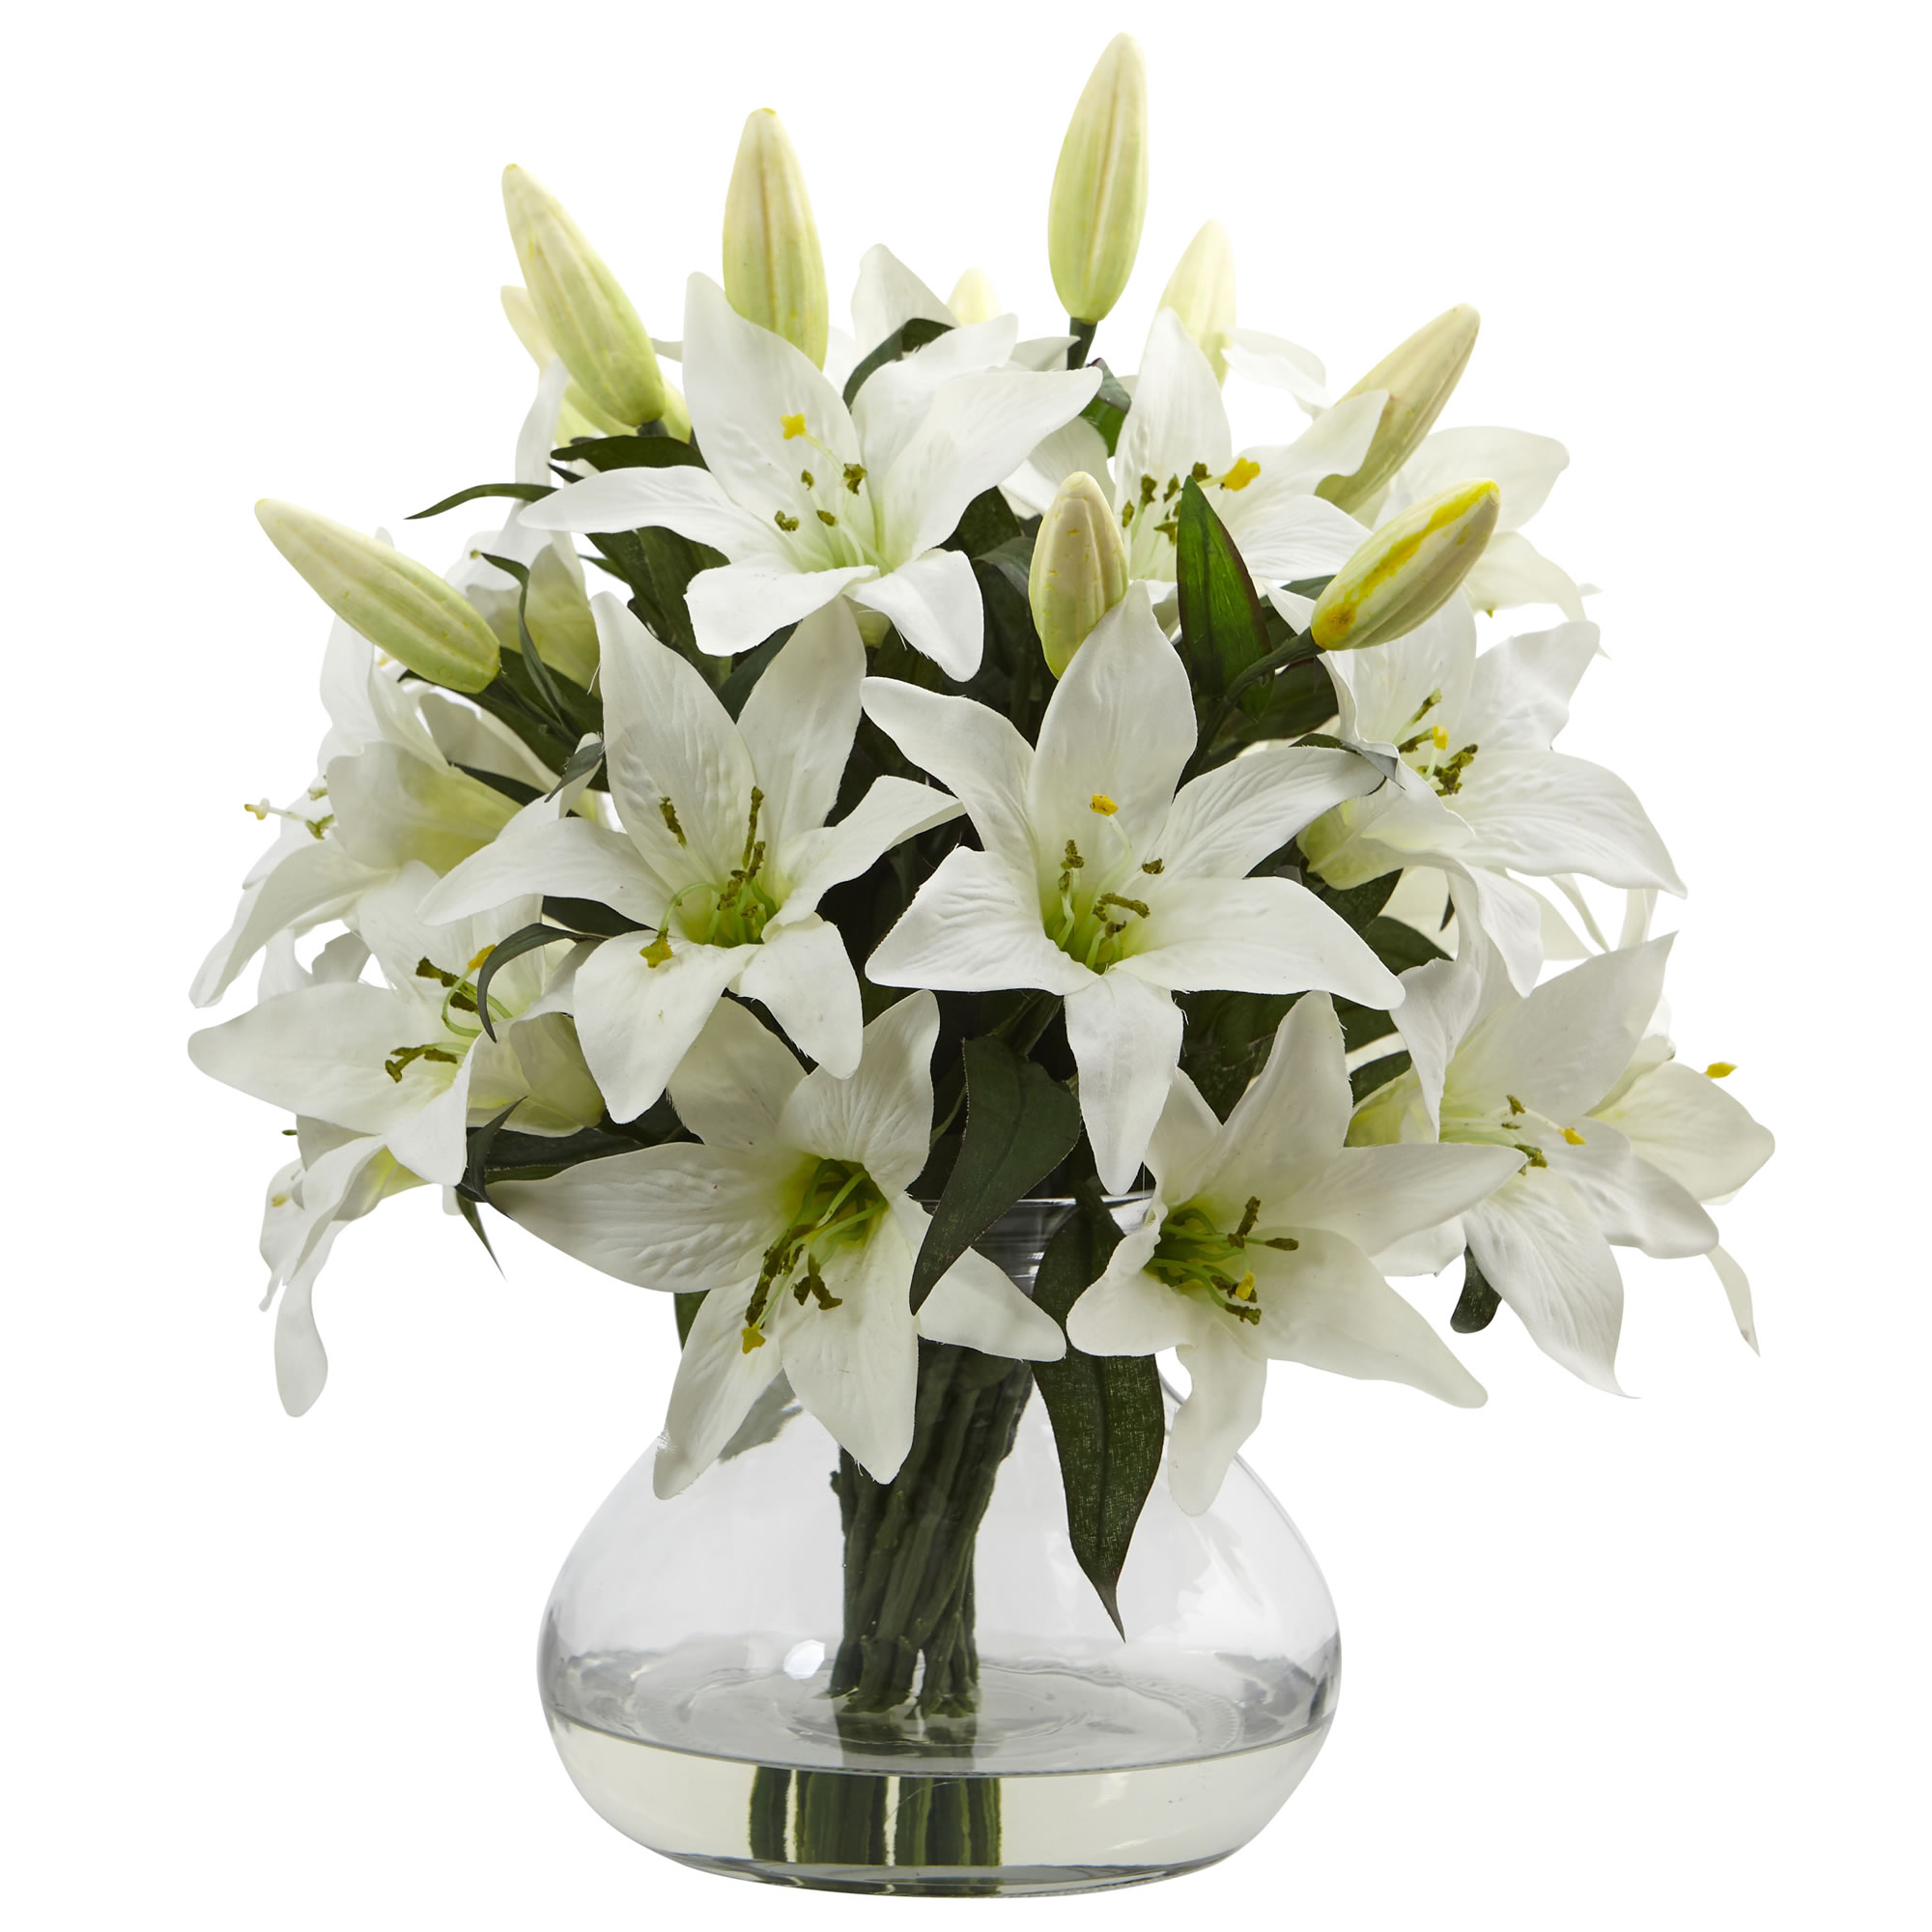 16 Inch White Large Lily Arrangement In Vase